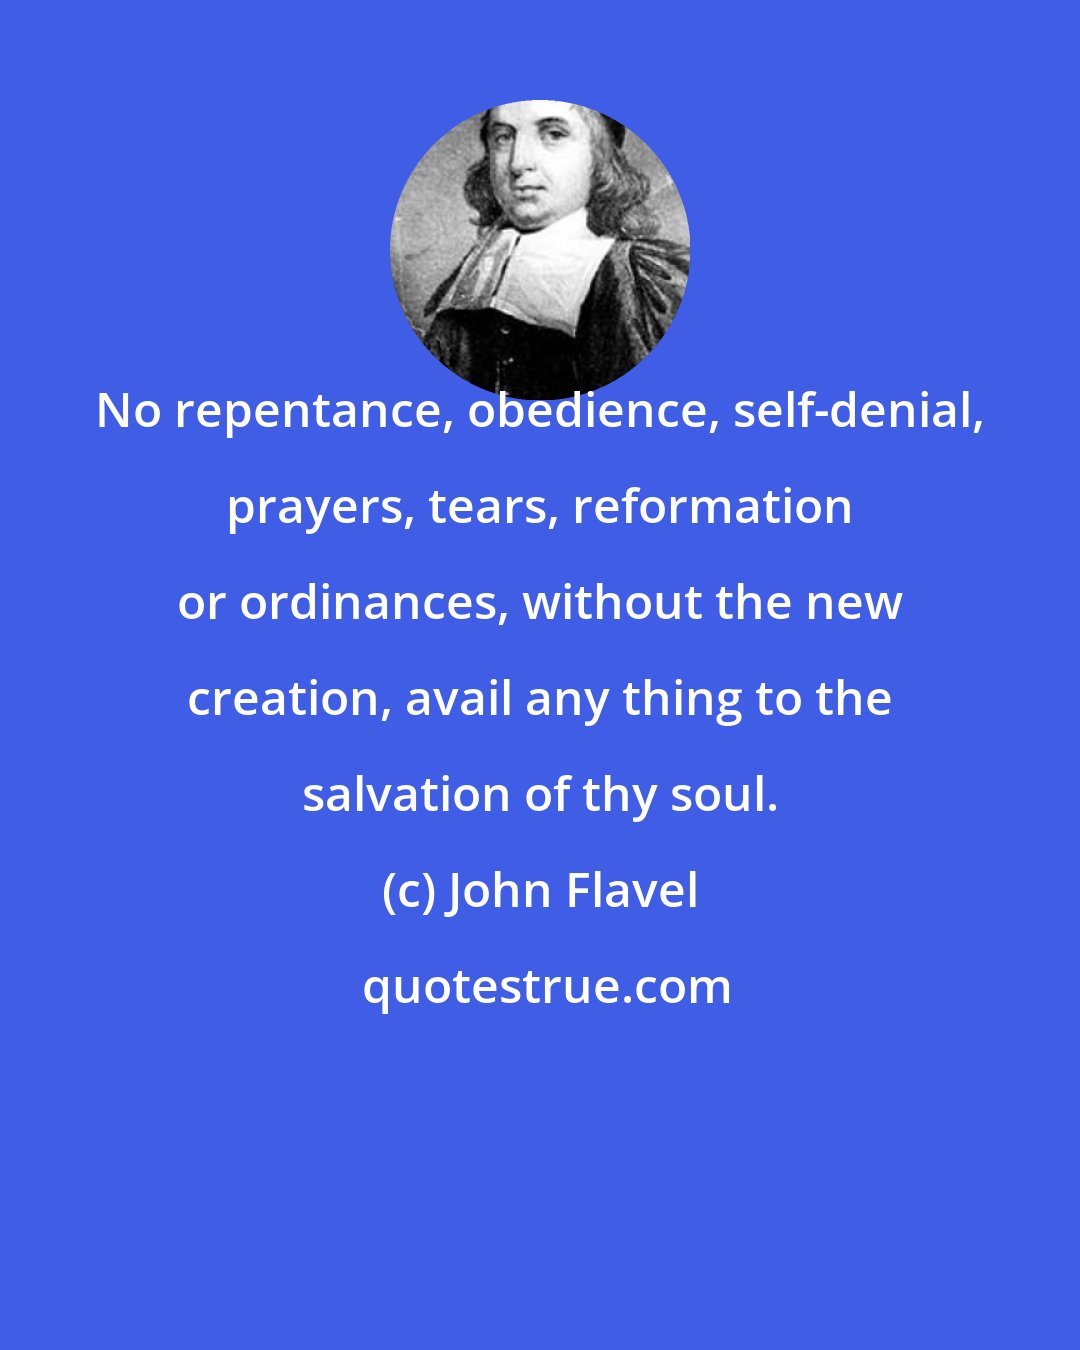 John Flavel: No repentance, obedience, self-denial, prayers, tears, reformation or ordinances, without the new creation, avail any thing to the salvation of thy soul.